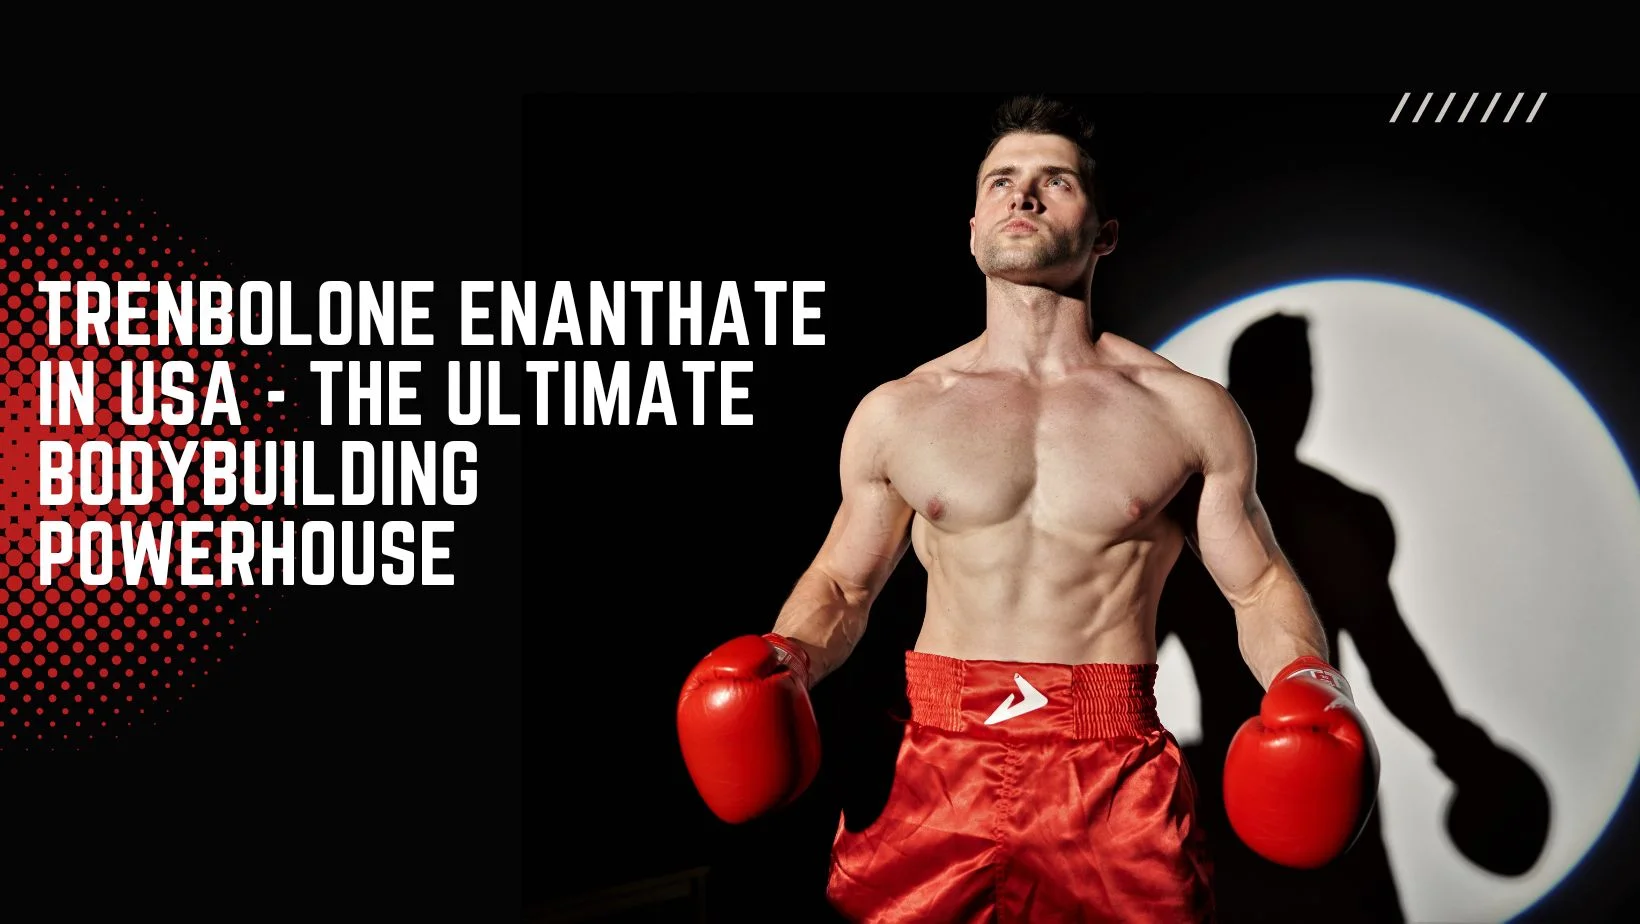 Is Tren legal in the US? Where to buy Tren? Discover Trenbolone results in 2 weeks and if it's safe for you. Navigate the changing steroid laws and make informed choices for your fitness journey.